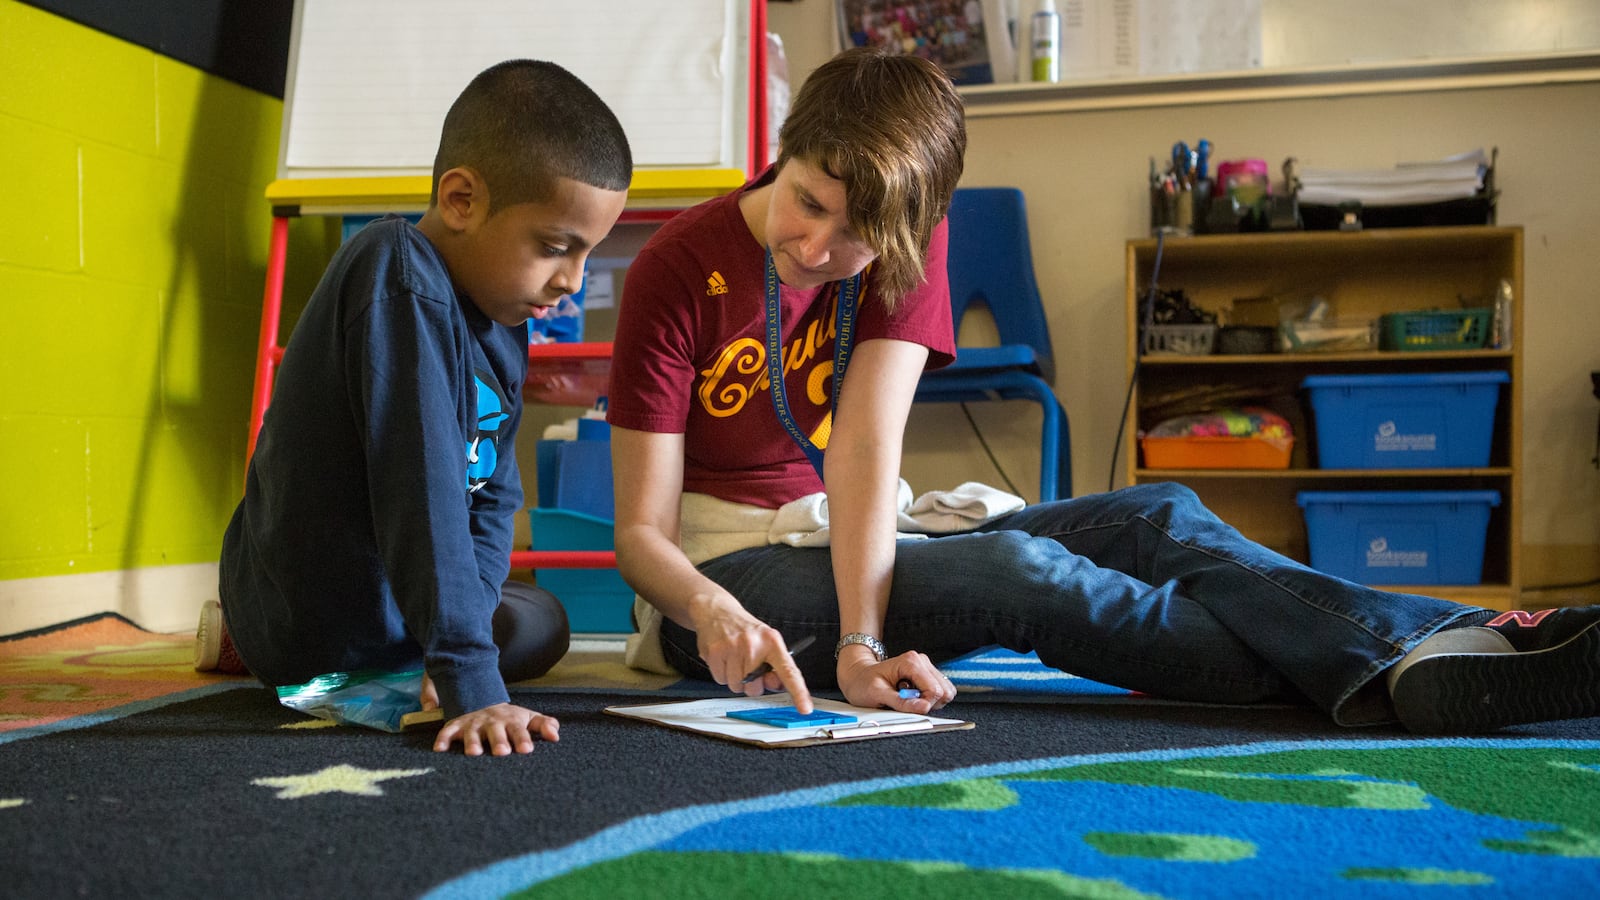 A teacher and a student sit on a rug shaped like the Earth. The teacher is pointing to a piece of paper and the student is looking at it.